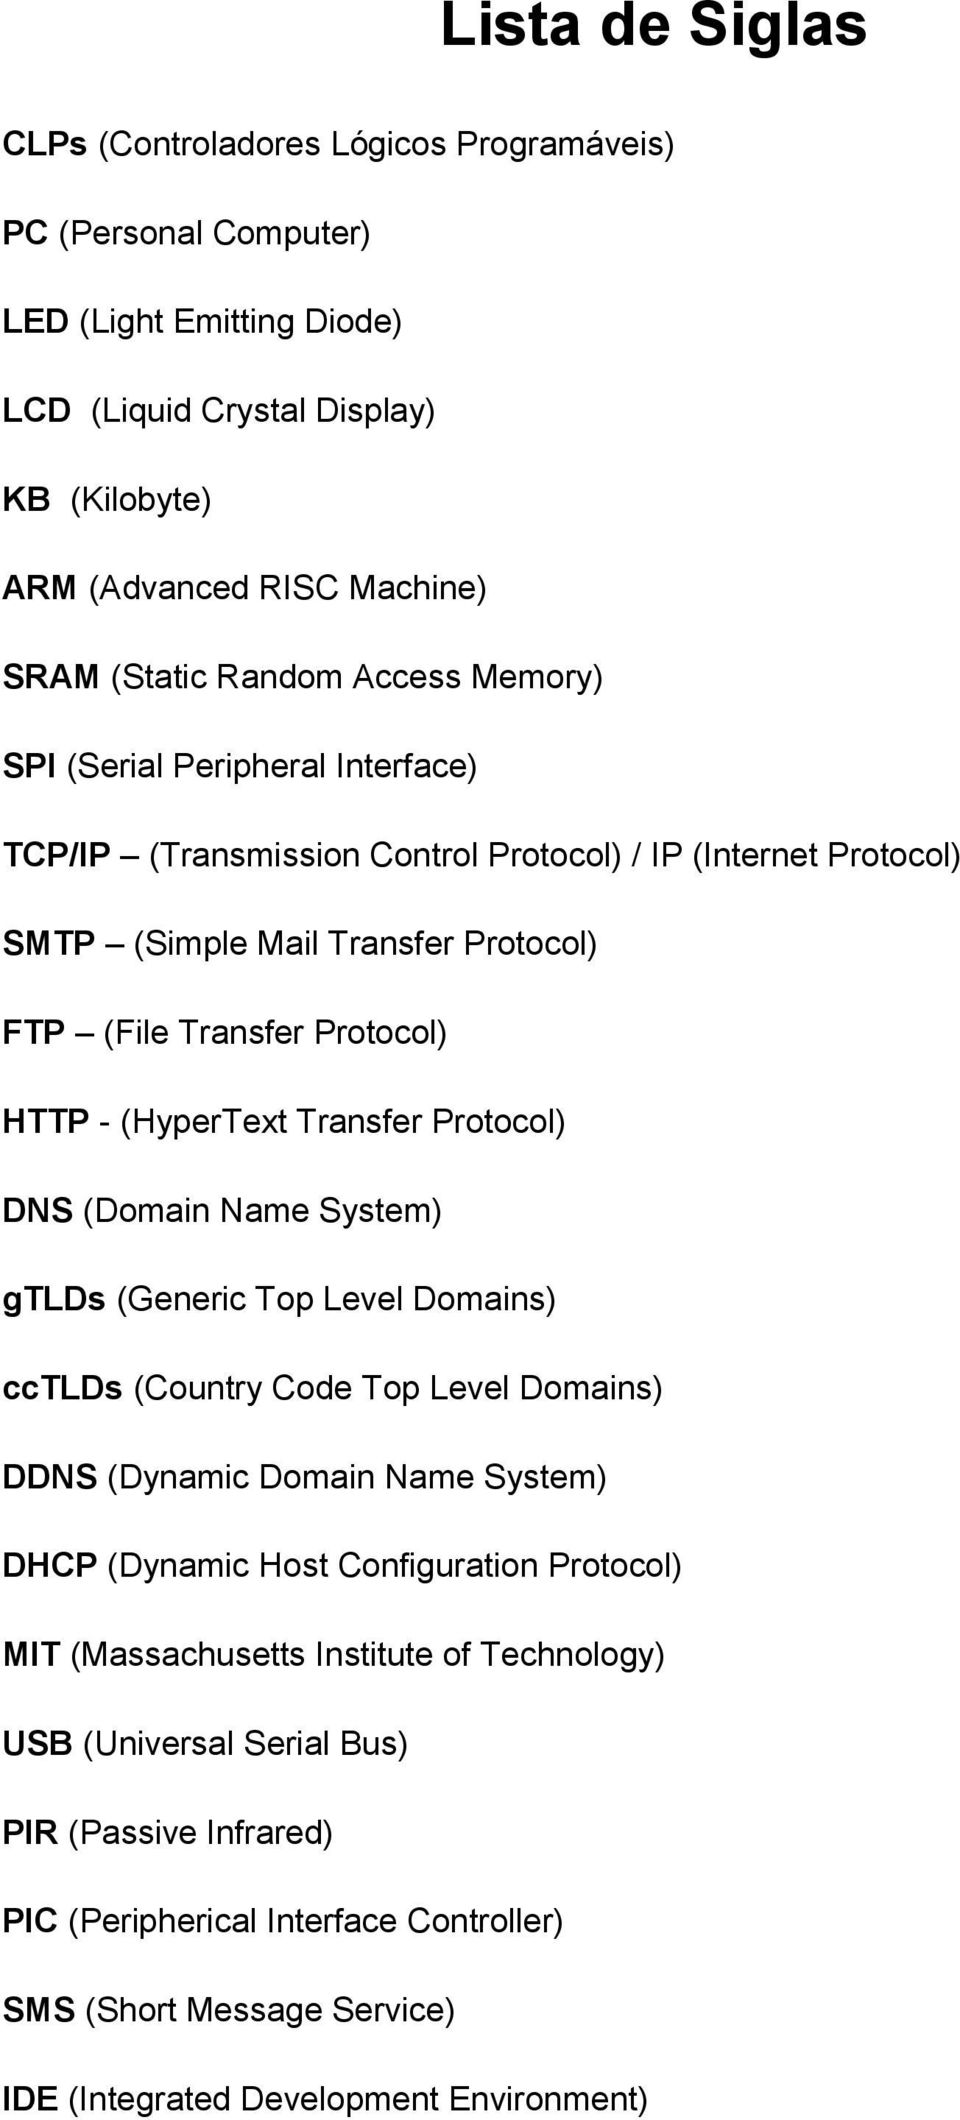 Transfer Protocol) DNS (Domain Name System) gtlds (Generic Top Level Domains) cctlds (Country Code Top Level Domains) DDNS (Dynamic Domain Name System) DHCP (Dynamic Host Configuration Protocol) MIT